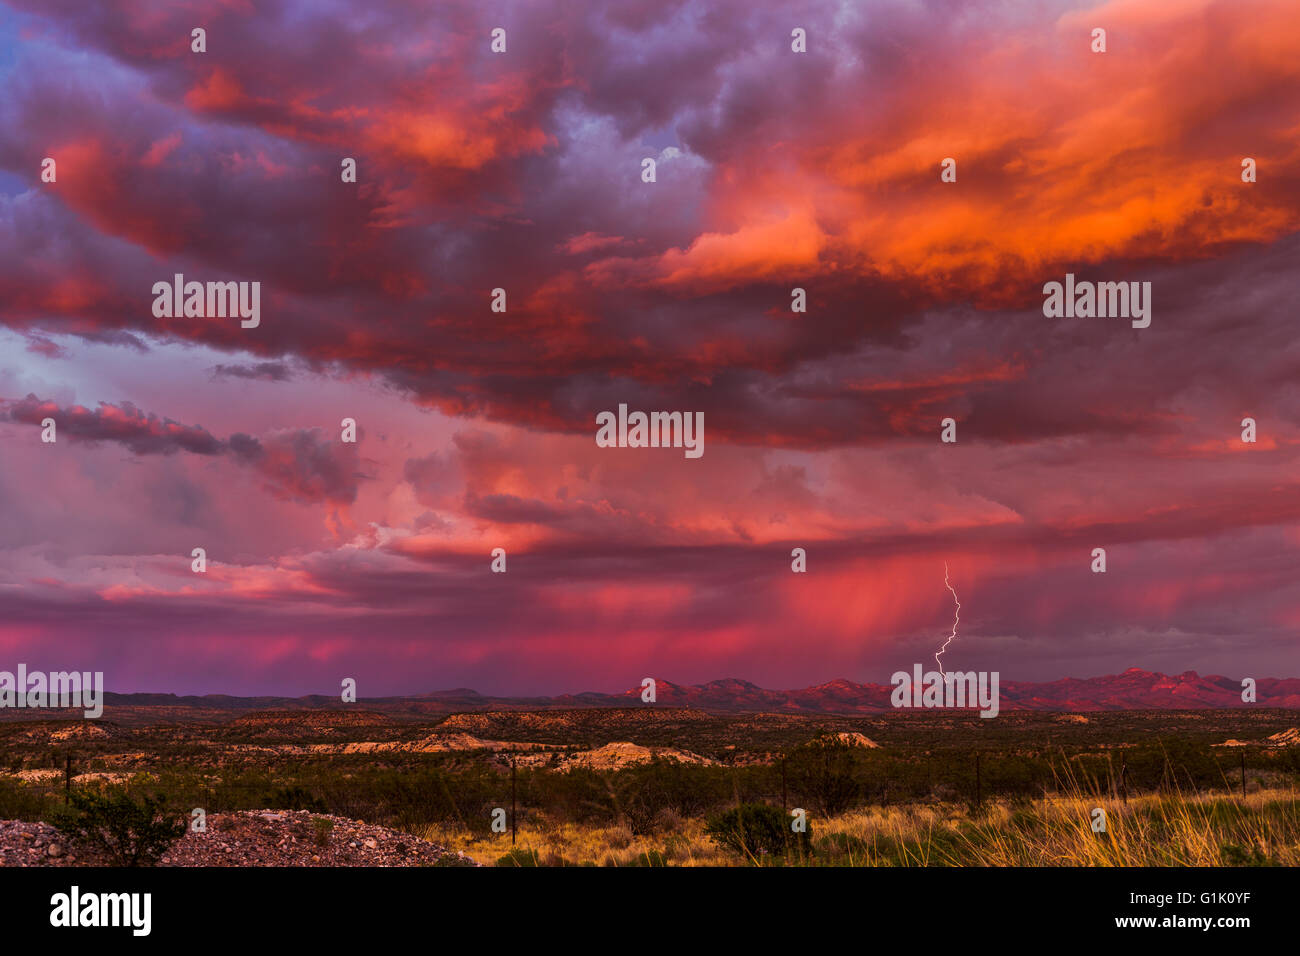 Dramatic clouds and sunset sky with lightning strike from a monsoon storm near San Carlos, Arizona. Stock Photo